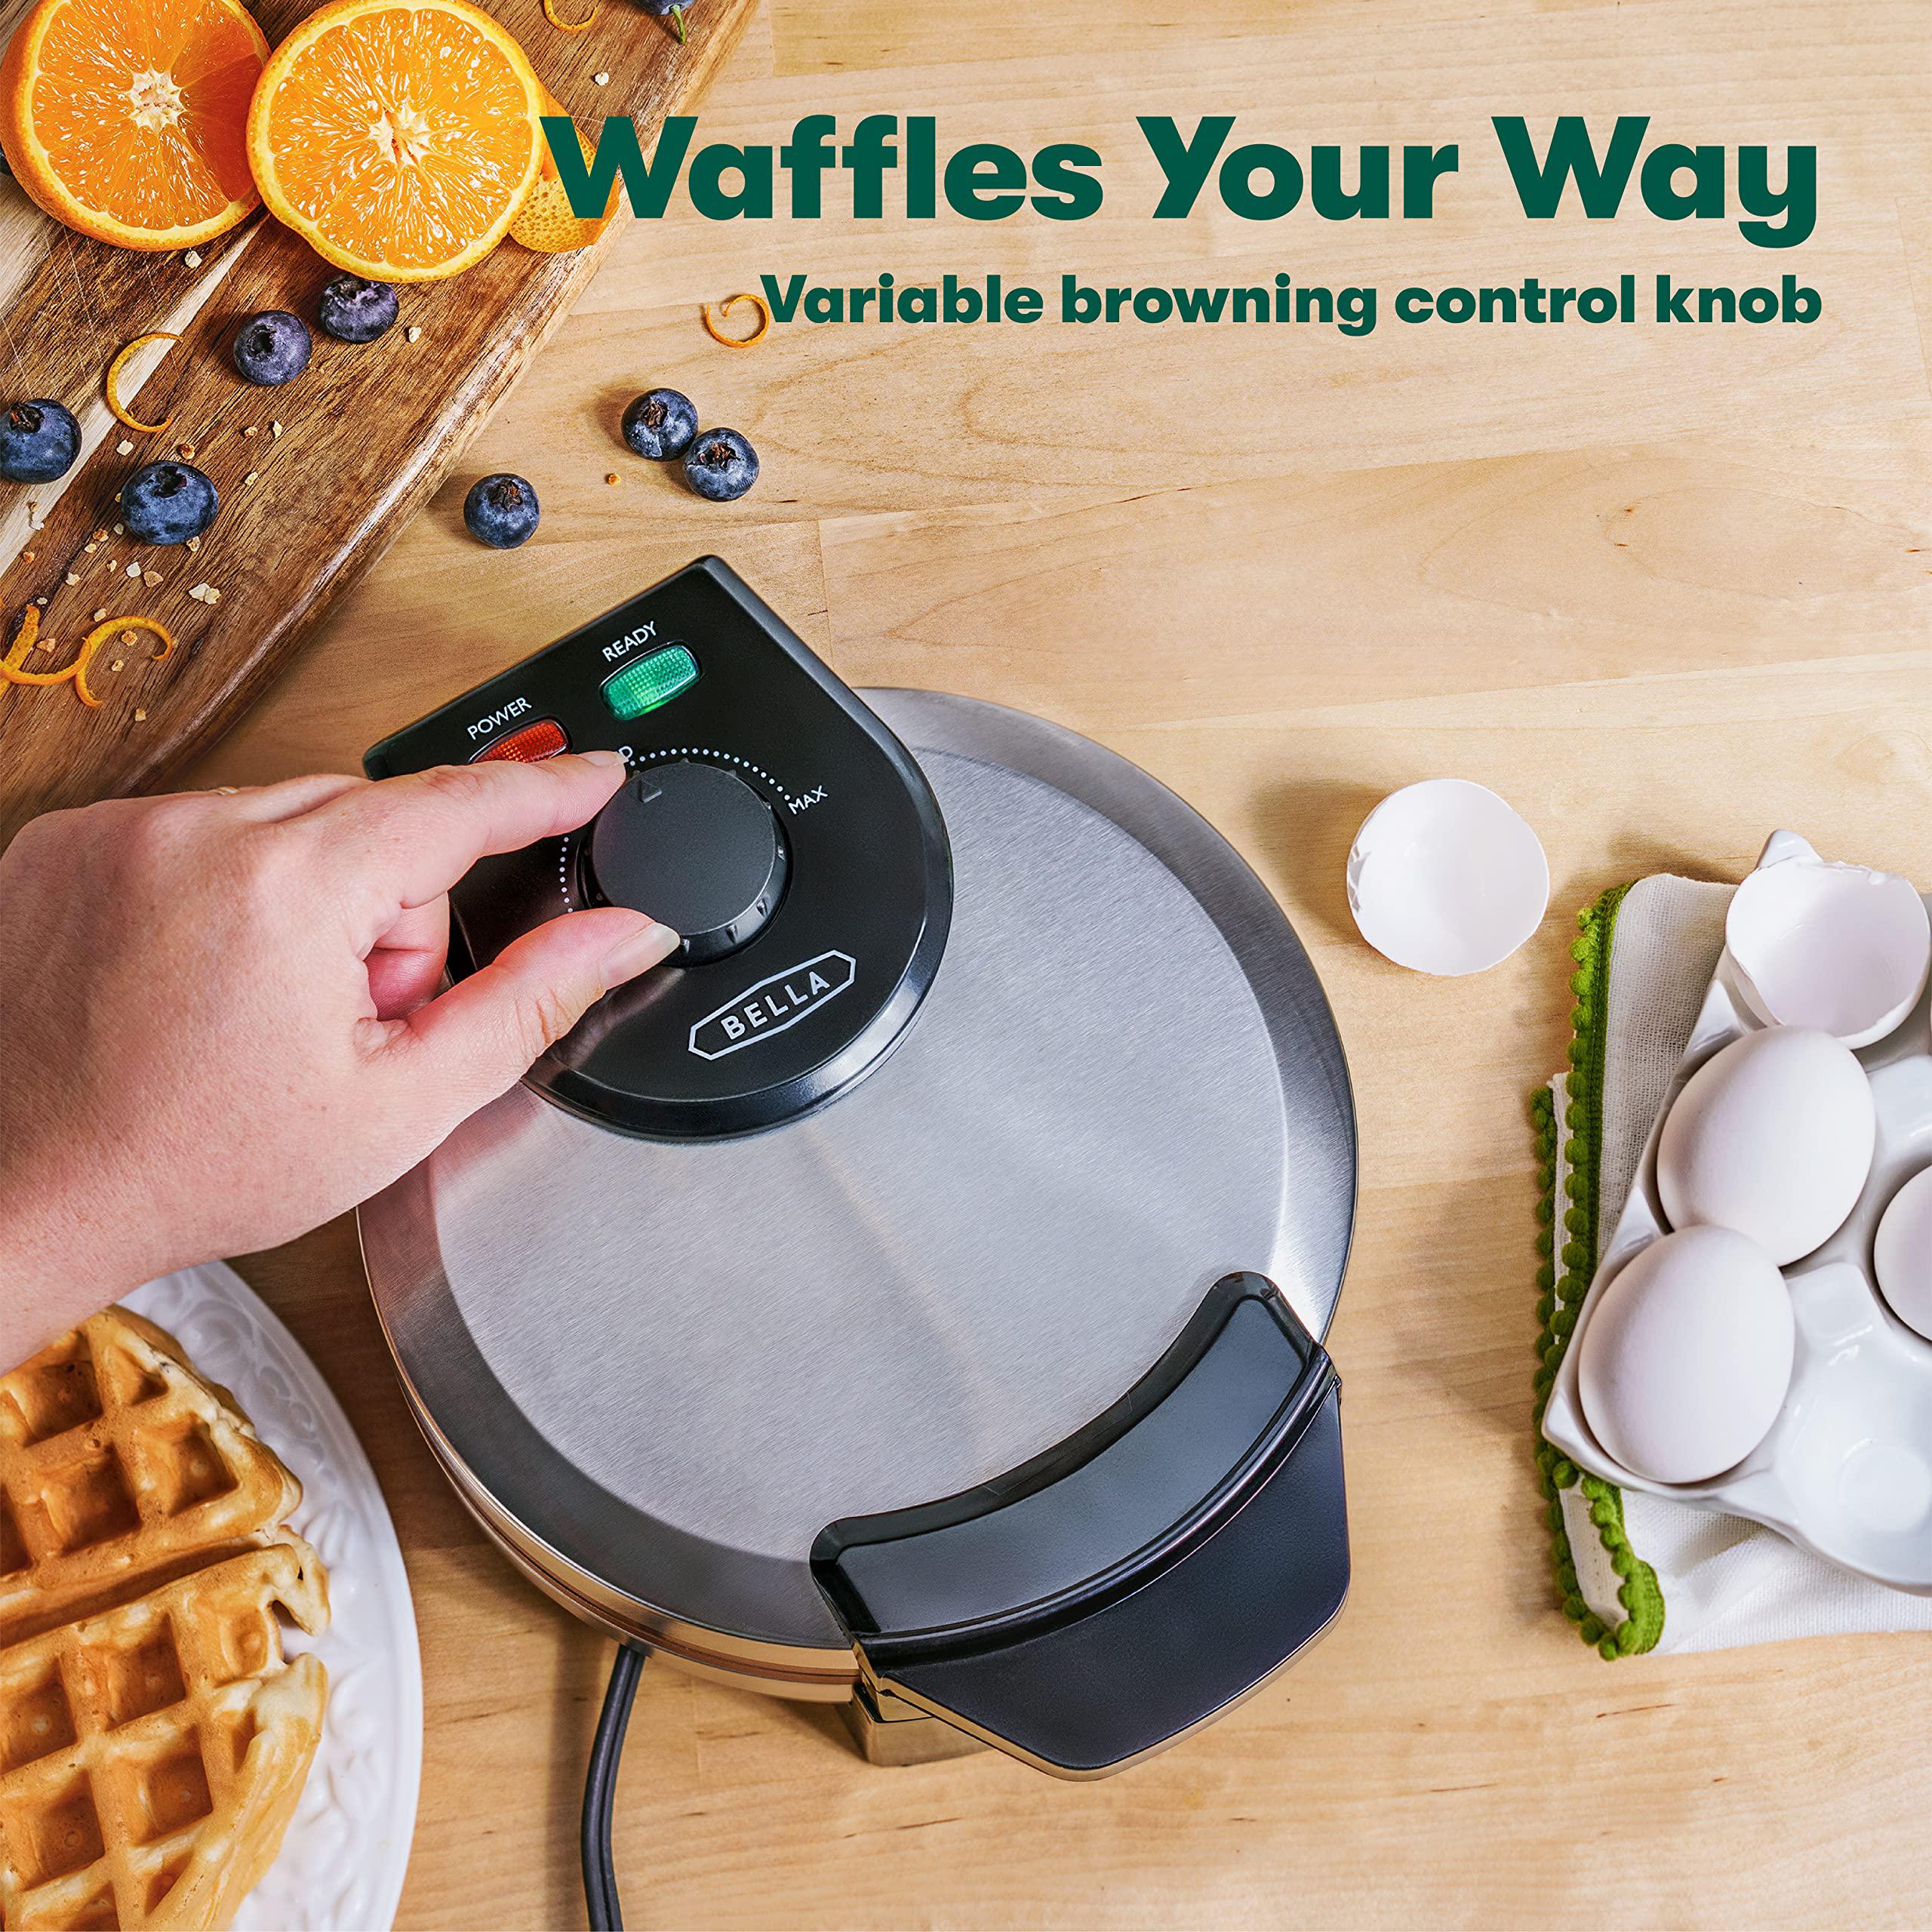 bella classic belgian waffle maker, 7" round, non stick, waffle iron makes 1 thick waffles, variable browning control knob, s